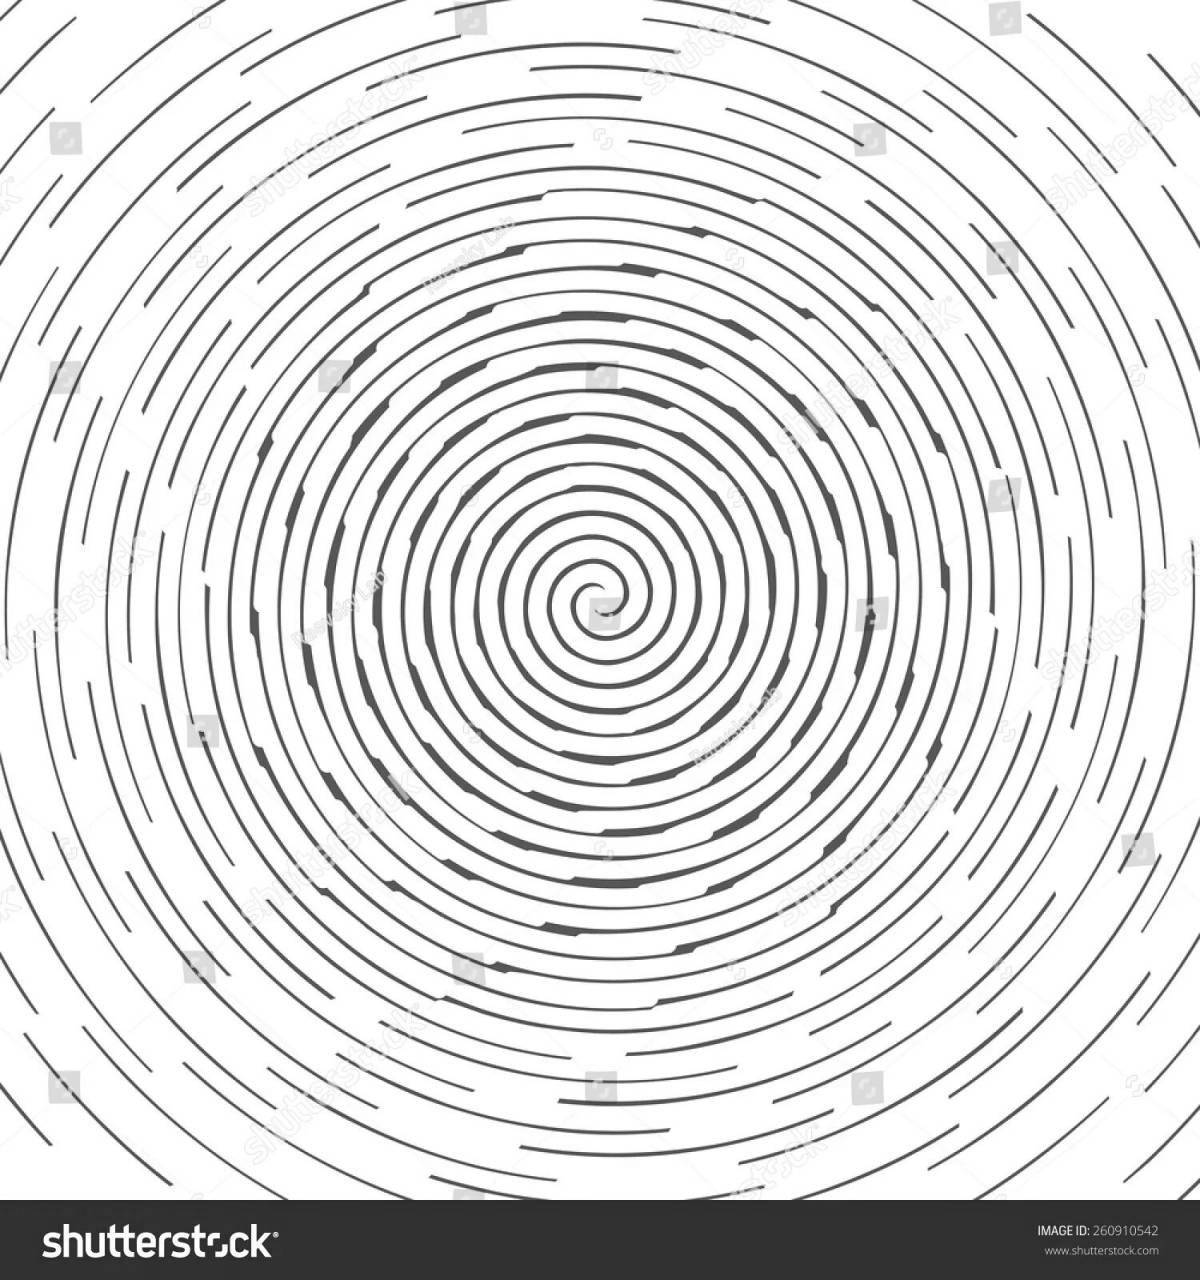 Gorgeous round lines create coloring